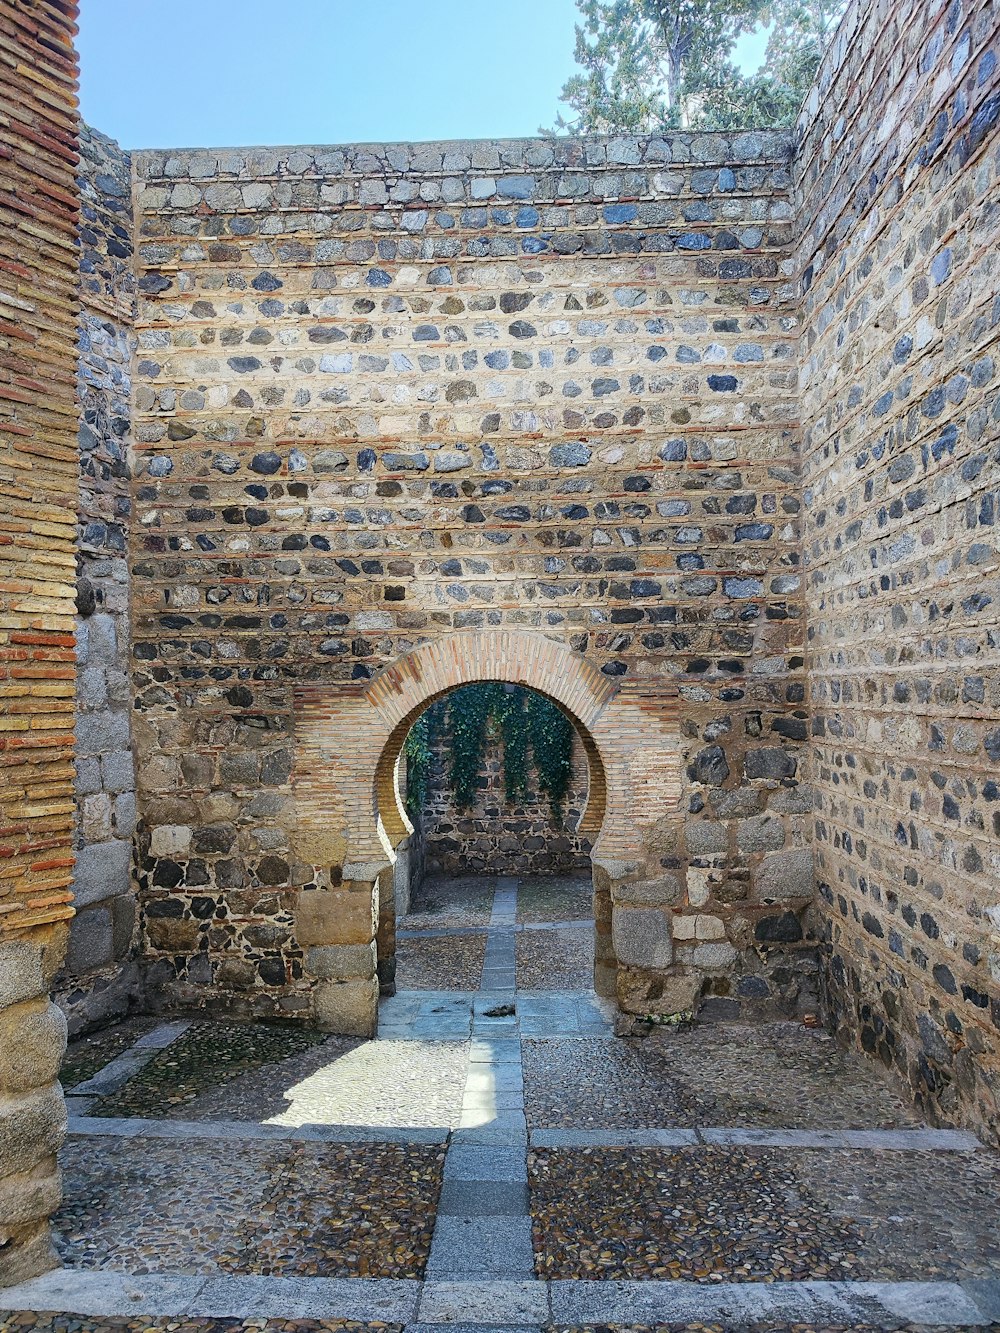 a stone archway in a brick building with a stone walkway